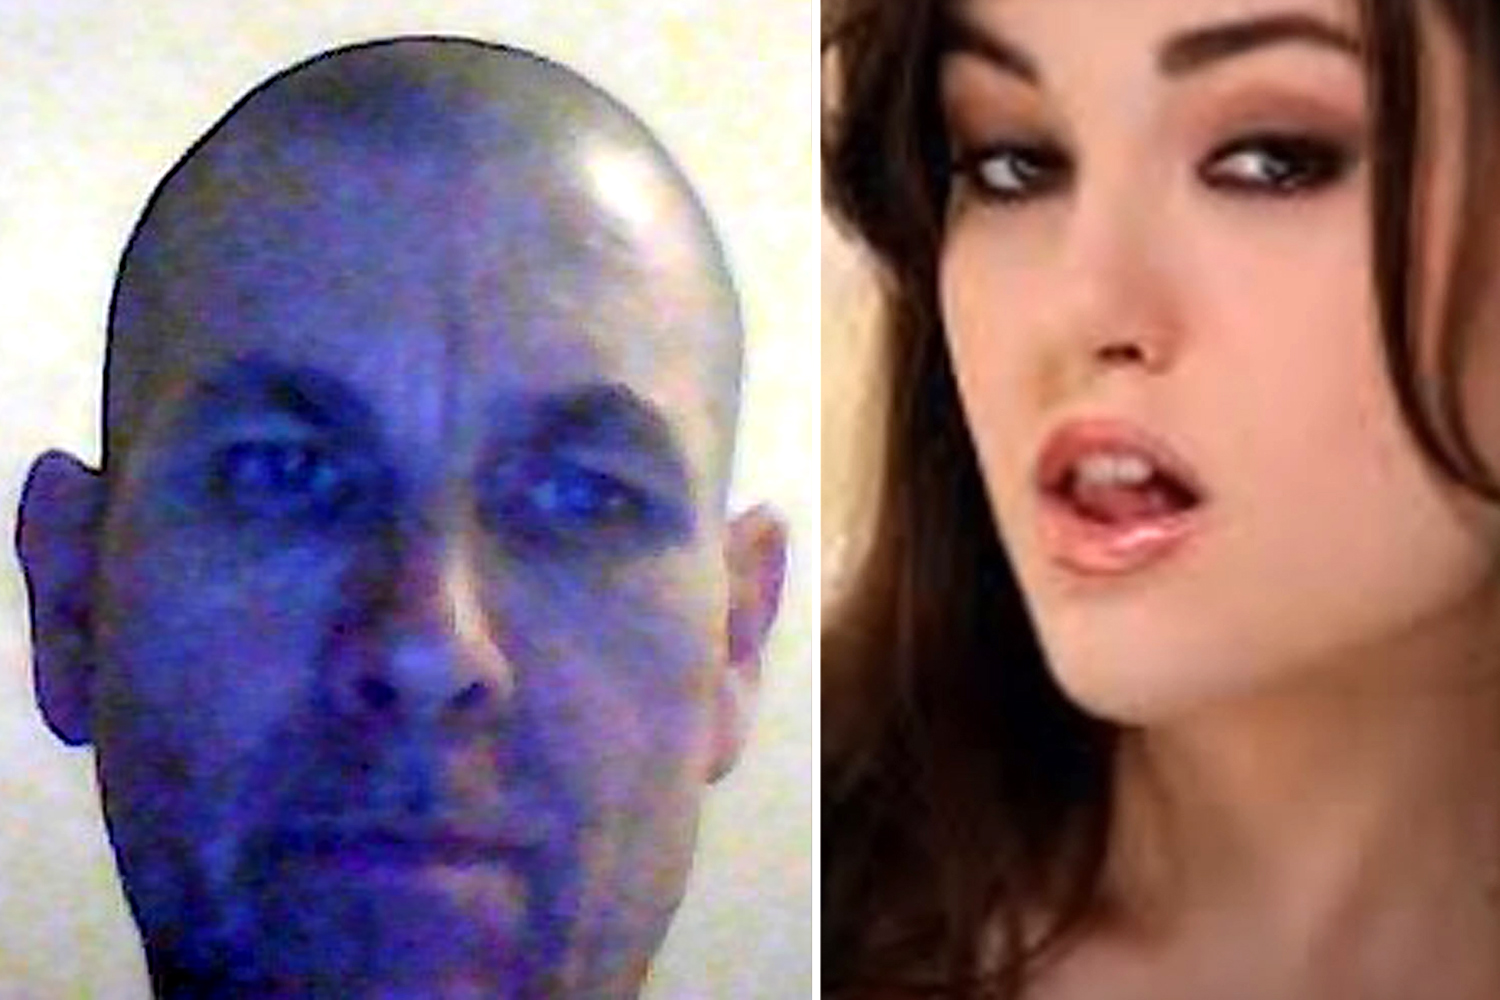 aidan montague recommends why did sasha grey leave porn pic